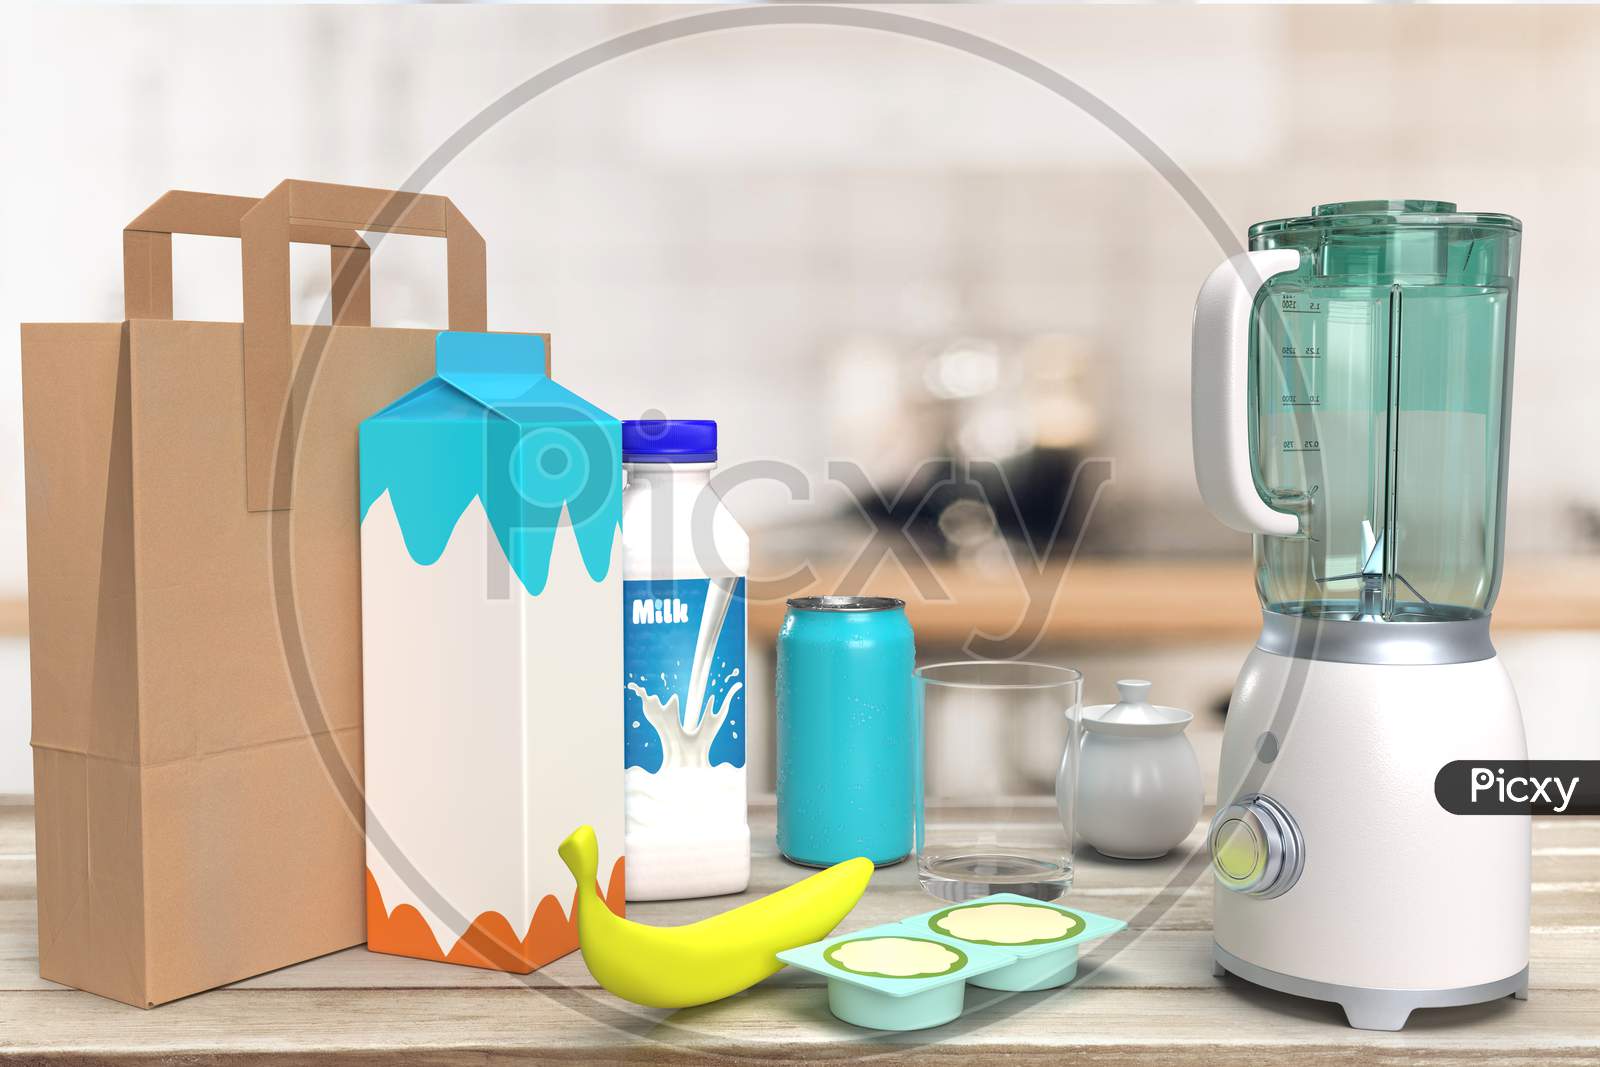 Realistic Looking Cardboard Bag, Healthy Breakfast, Mixer Grinder, Milk Cartoon, Glass Container, Soda Can And Ripe Fruits At Wooden Table Top In Blurred Kitchen Interior Background, 3D Rendering